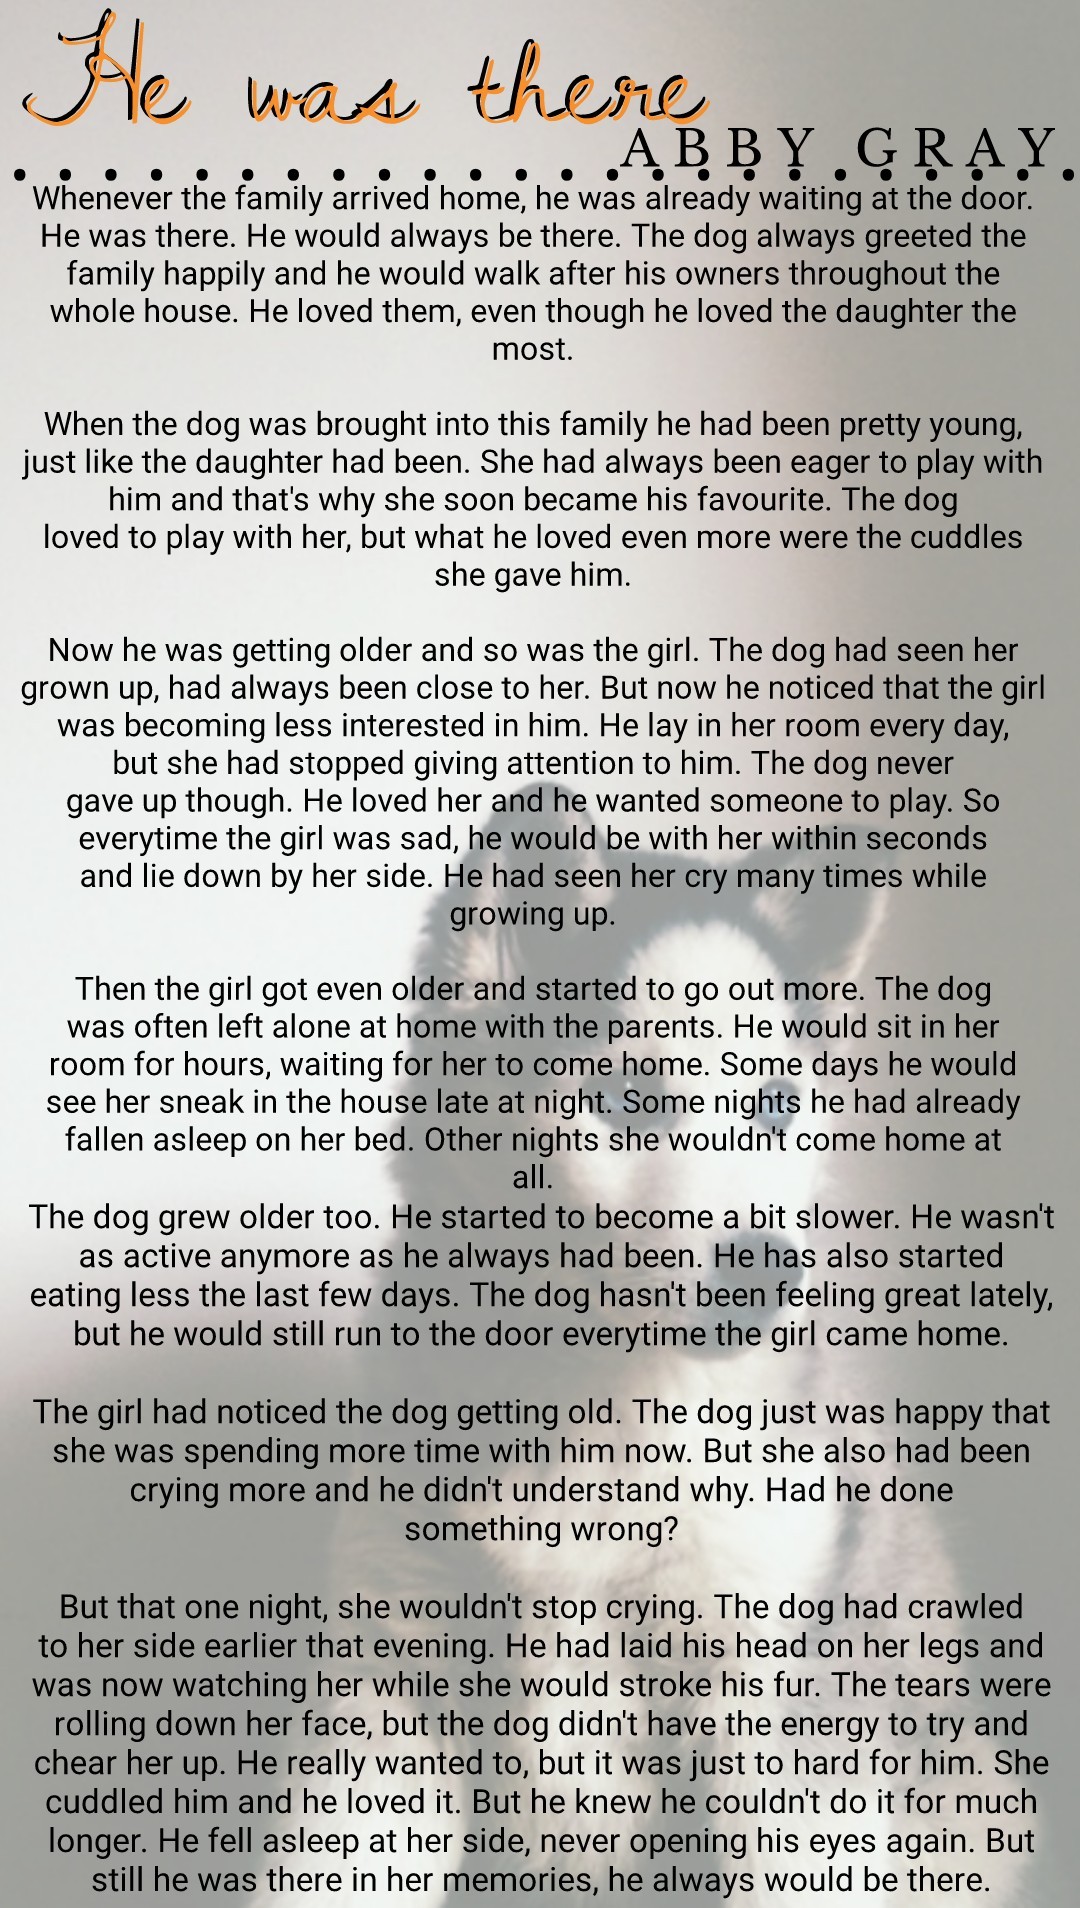 Another story I've written